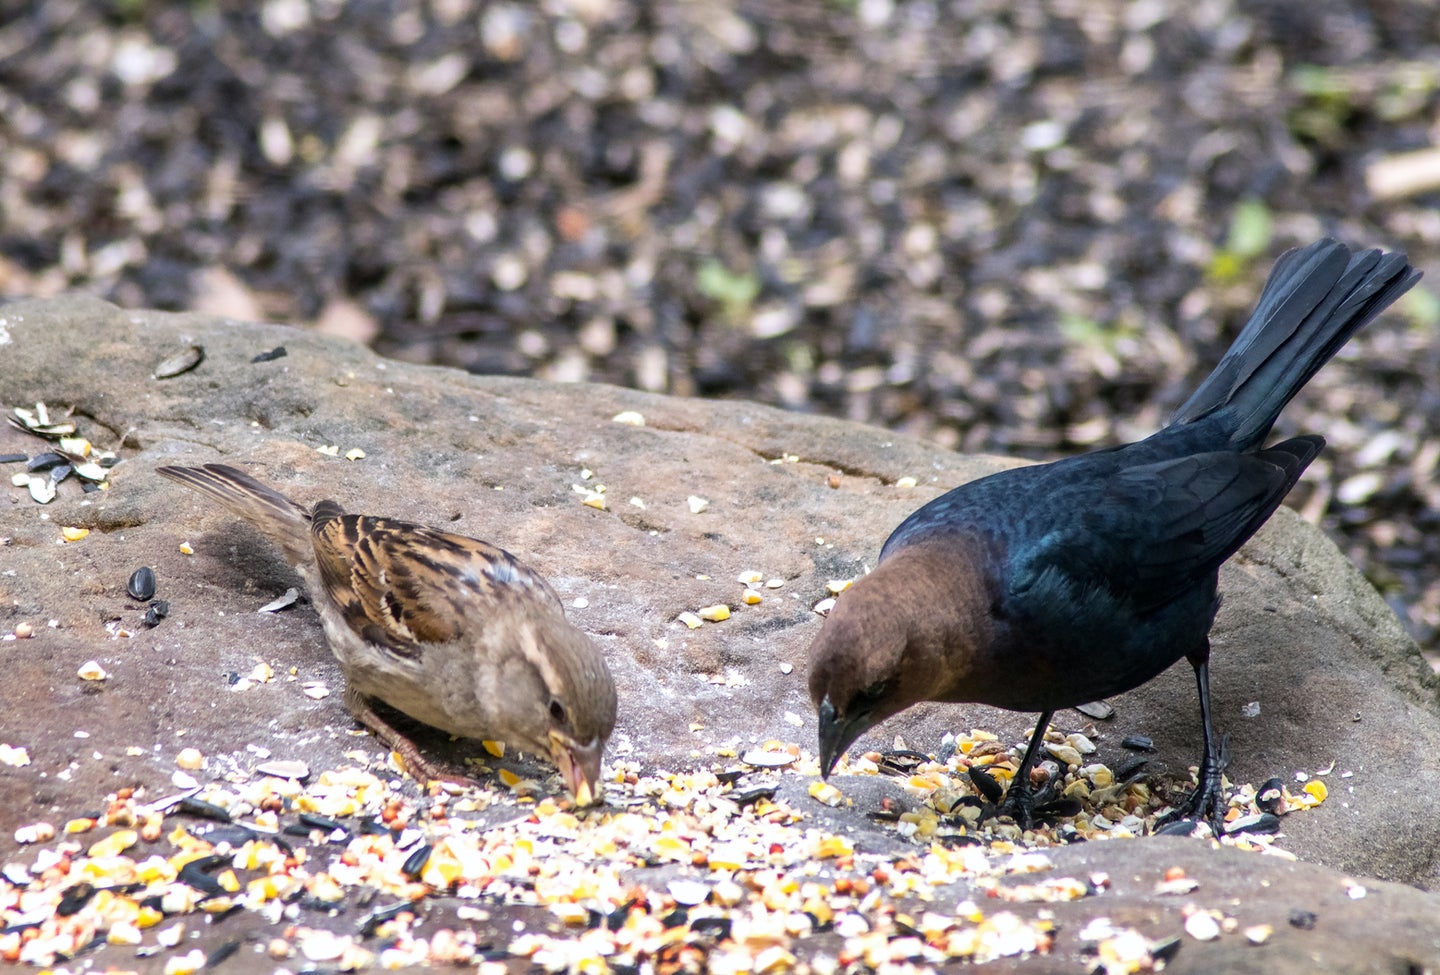 Female house sparrow and brown-headed cowbird, both potential vectors for bacteria that cause food-borne illnesses, feeding on birdseed on the ground